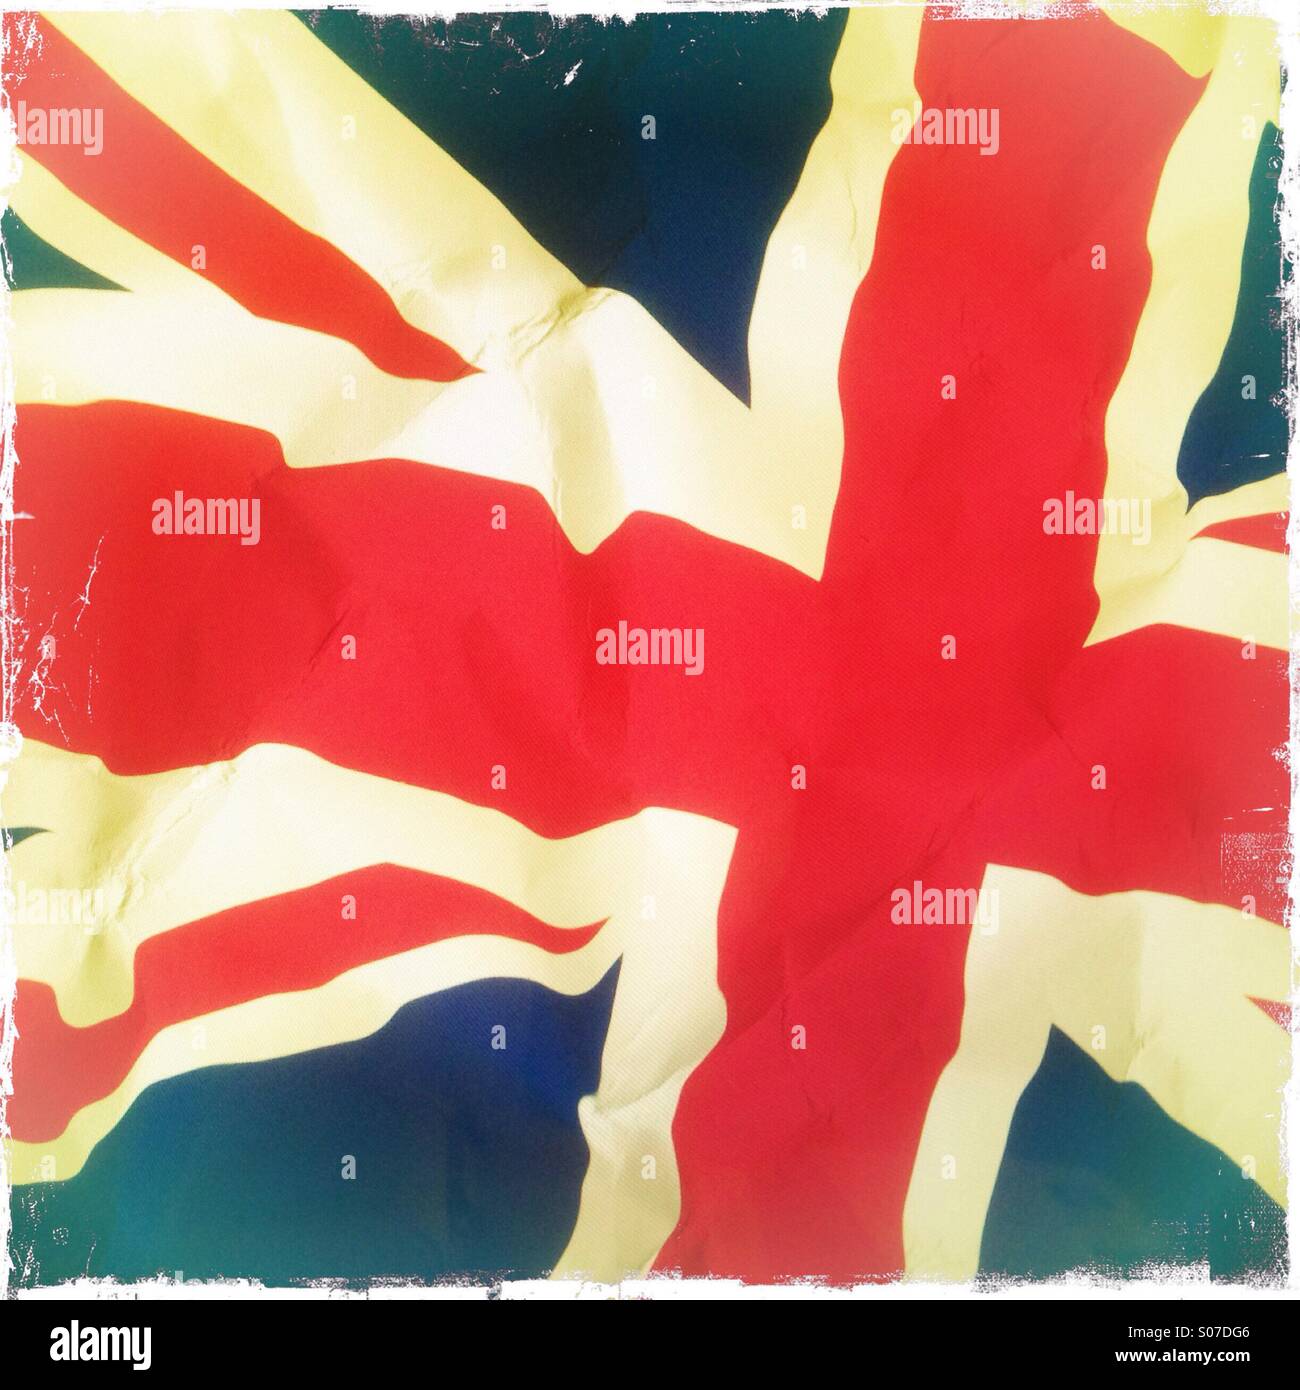 A print of the Union Jack flag of the United Kingdom on crumpled paper Stock Photo